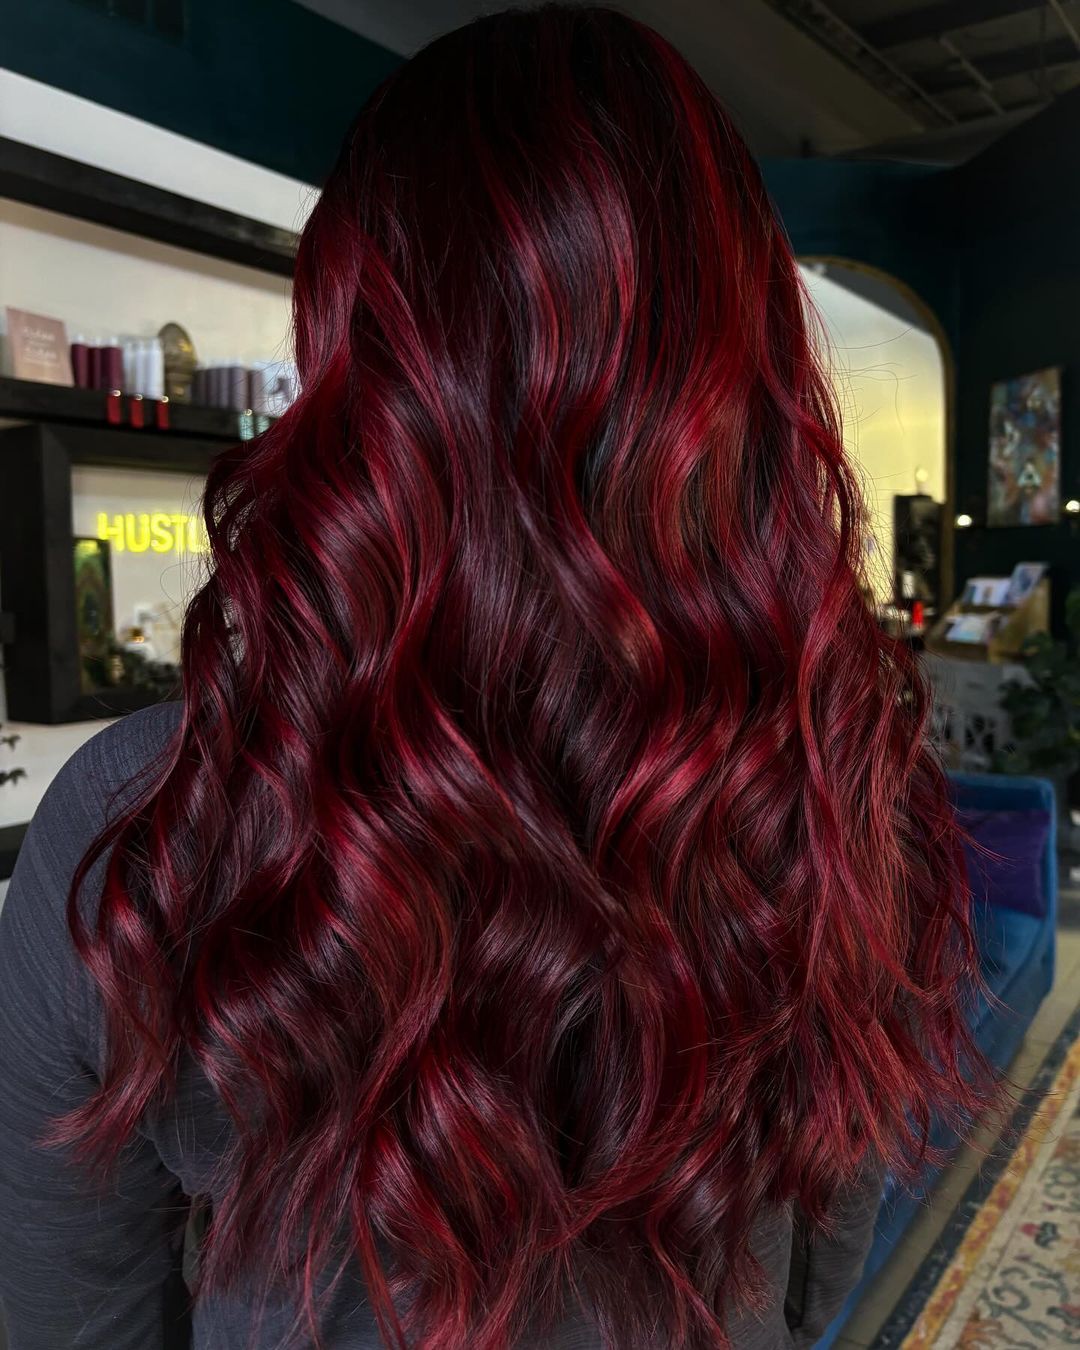 cherry cola with red highlights on long wavy hair